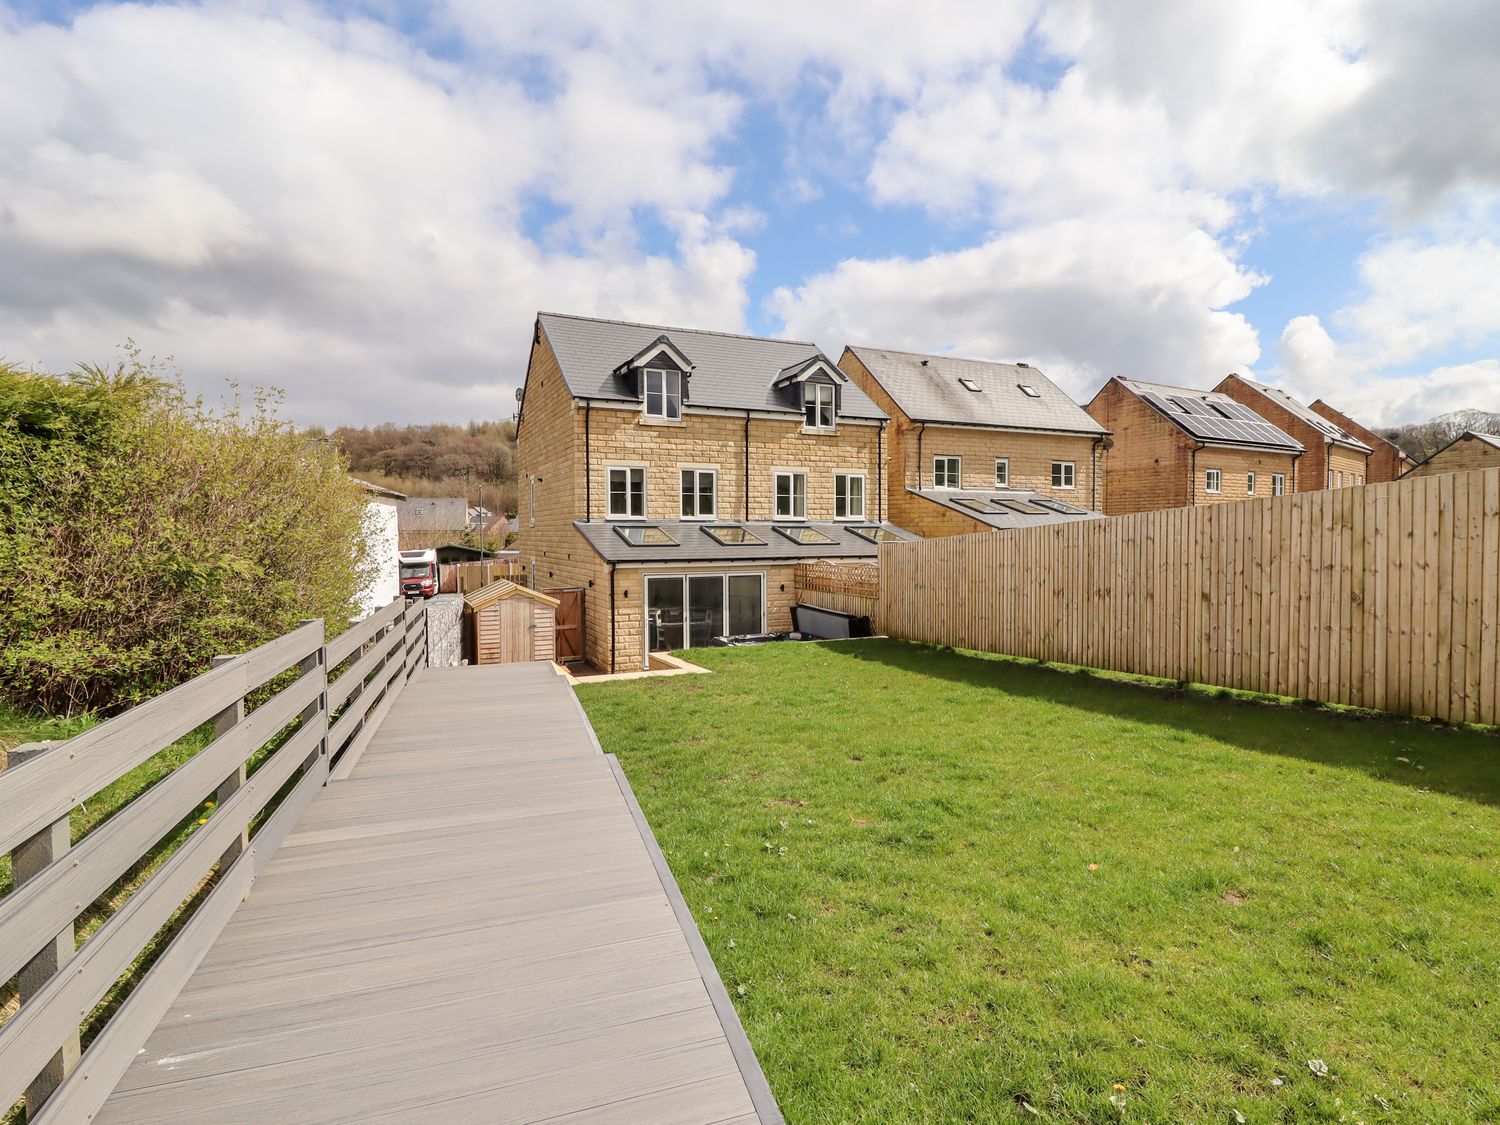 Cheshire View in Buxton, Derbyshire. 4 bedroom home with hot tub, enclosed garden, and chic interior